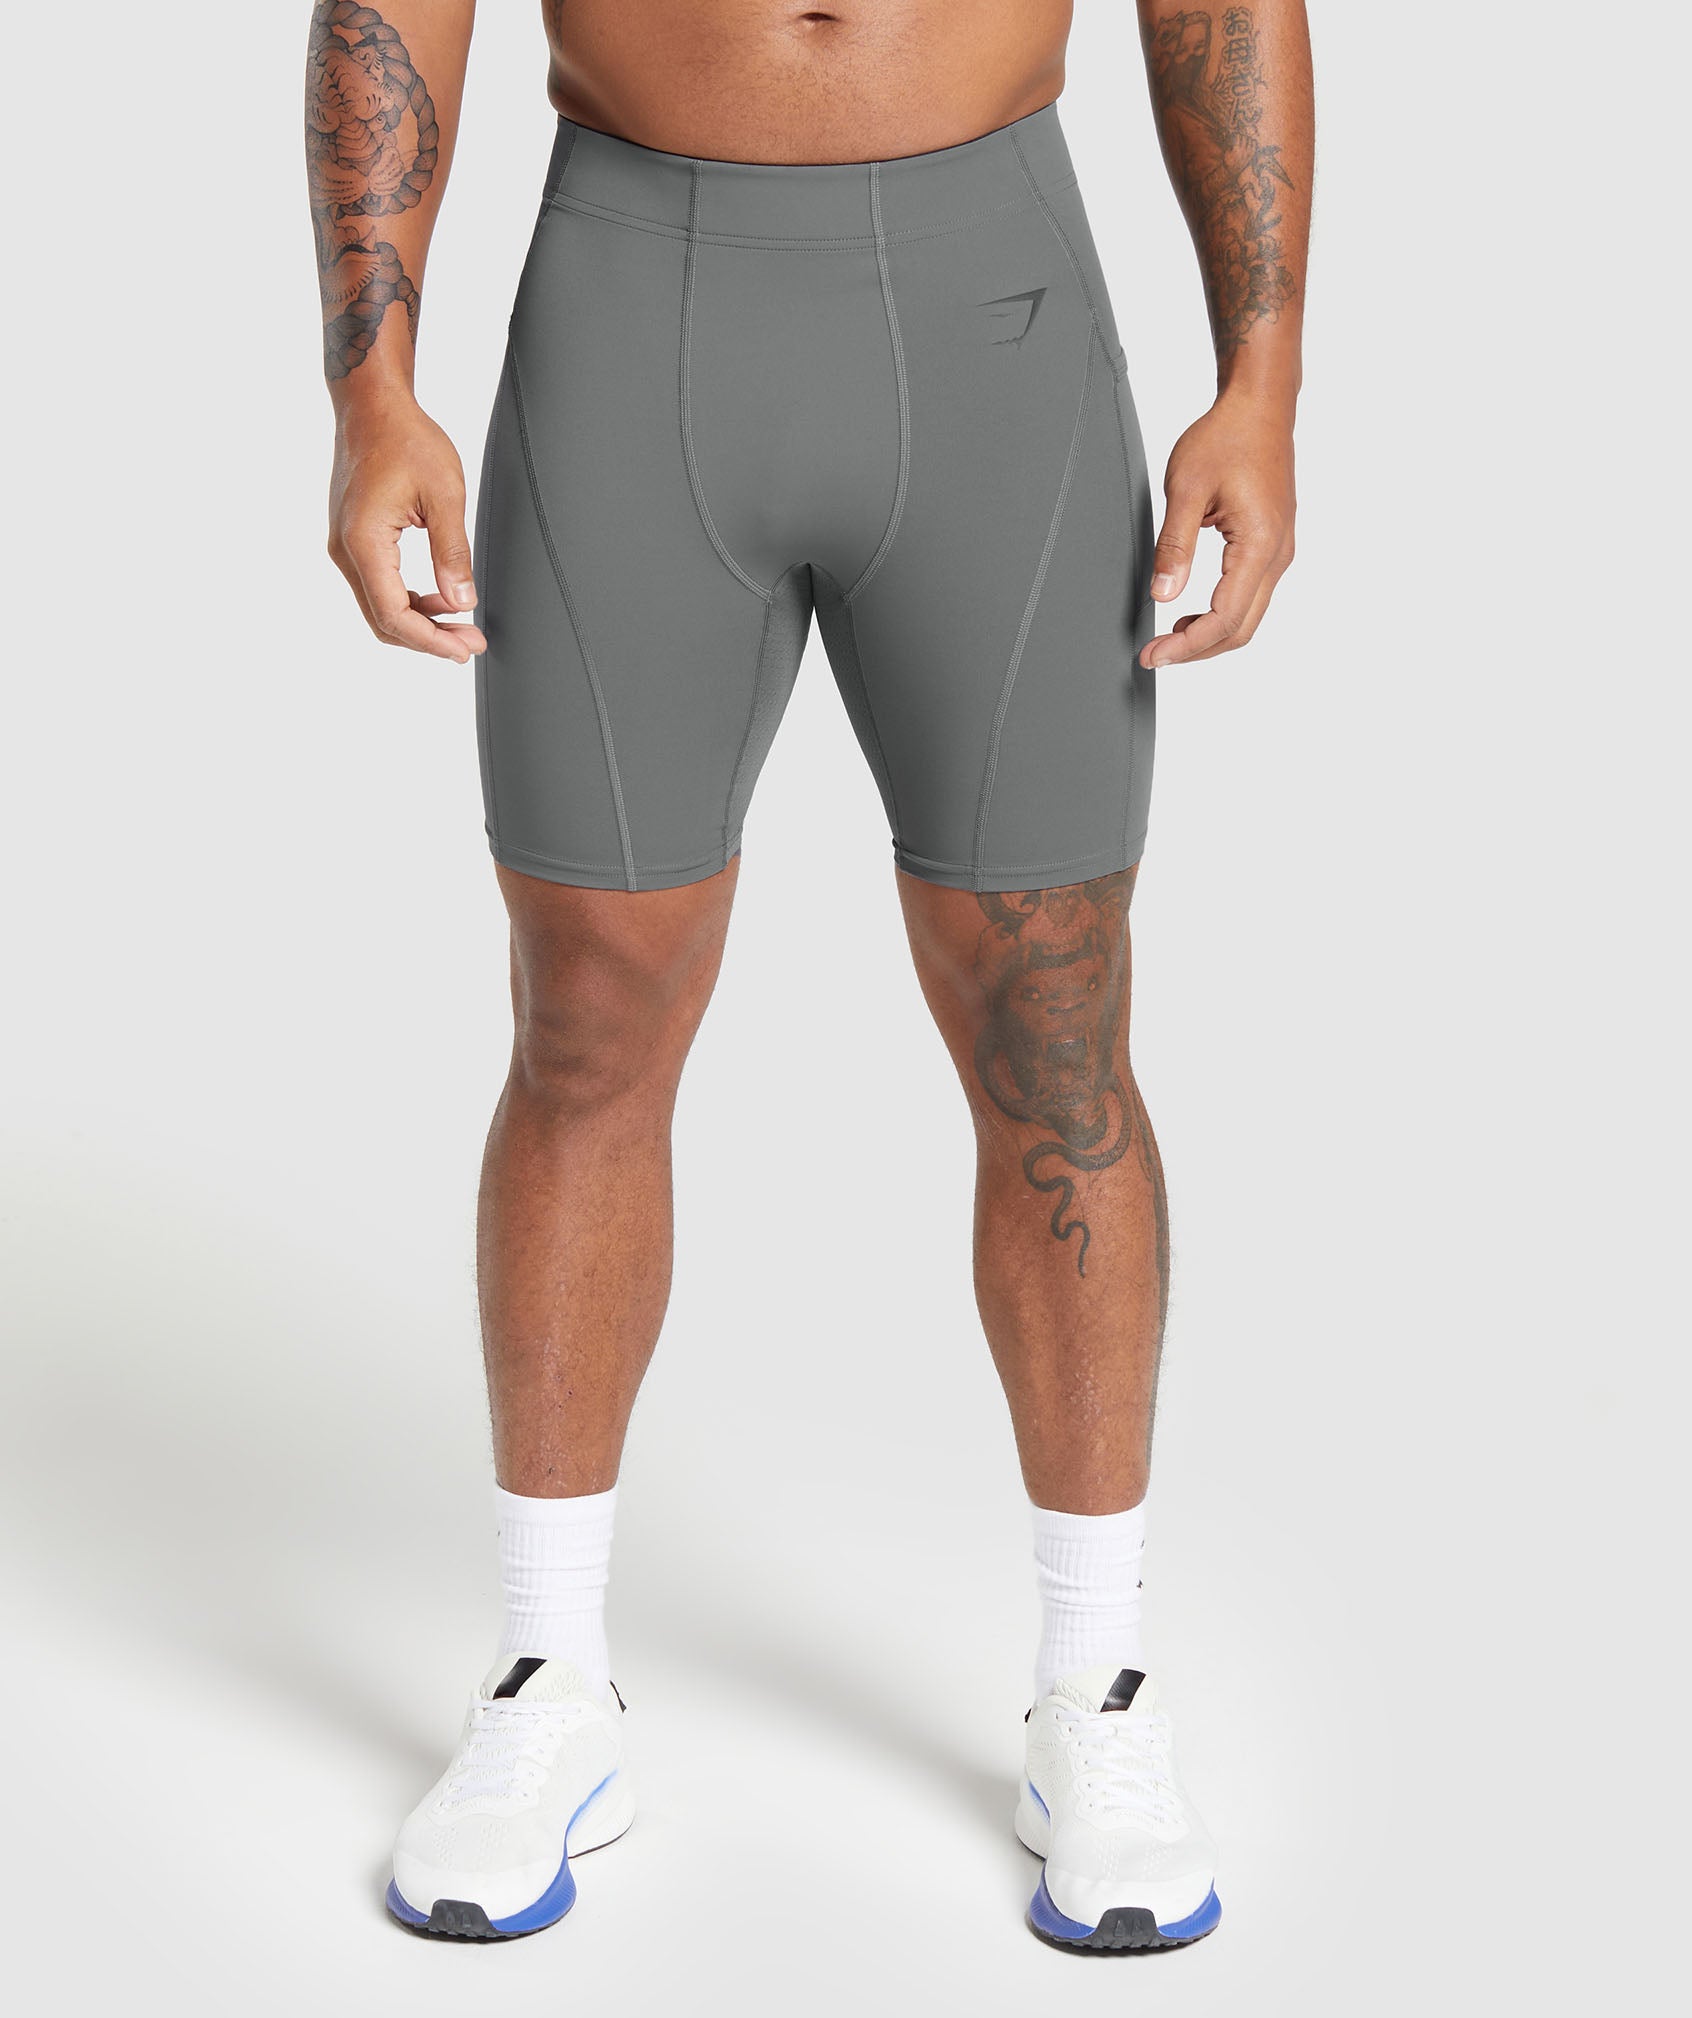 Control Baselayer Shorts in Pitch Grey